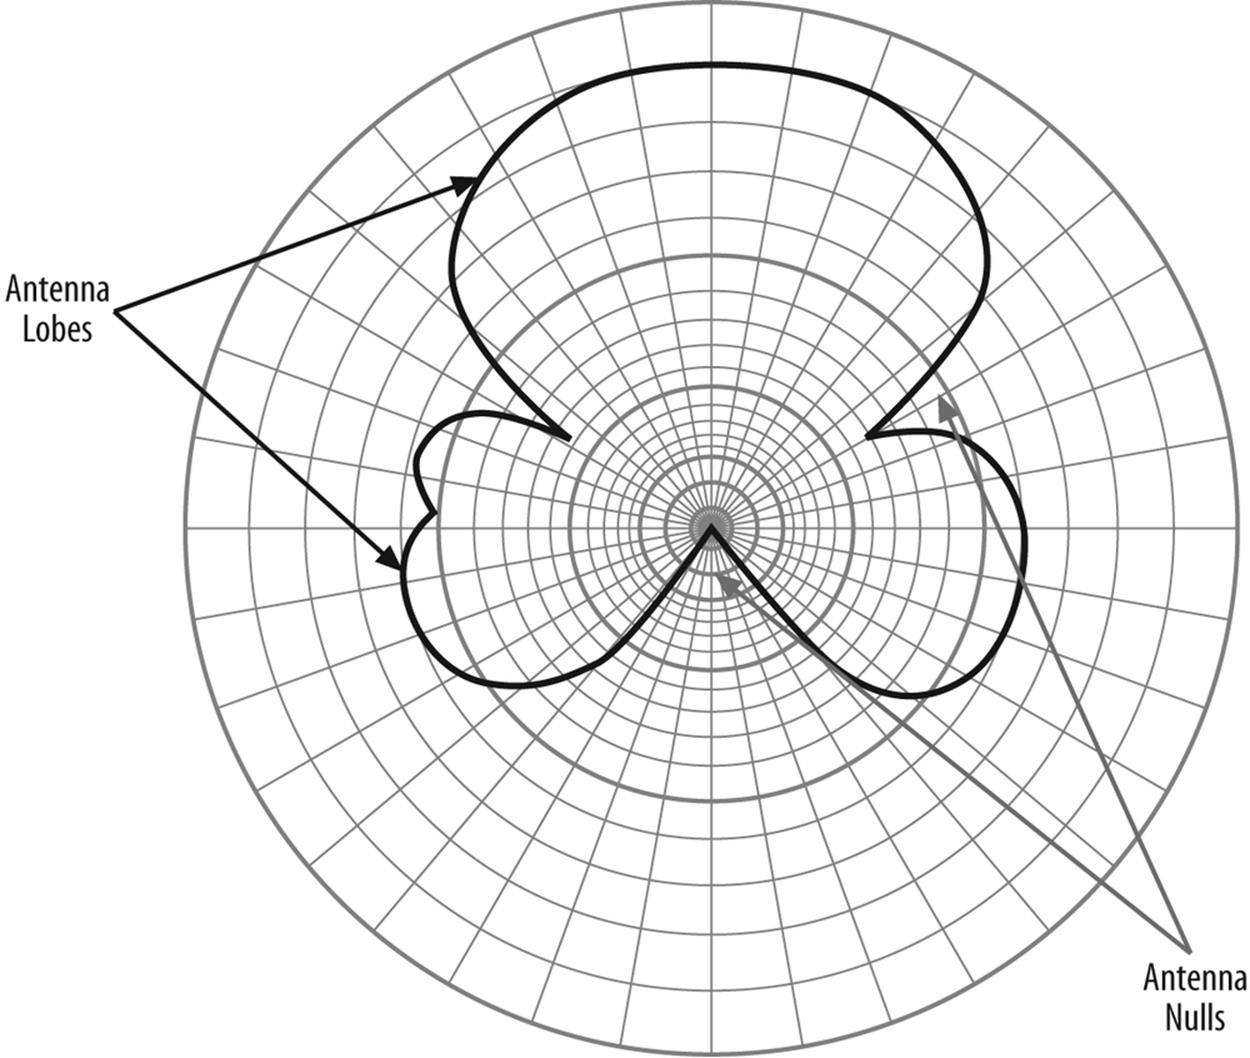 Antenna data sheets include charts that outline the antenna pattern